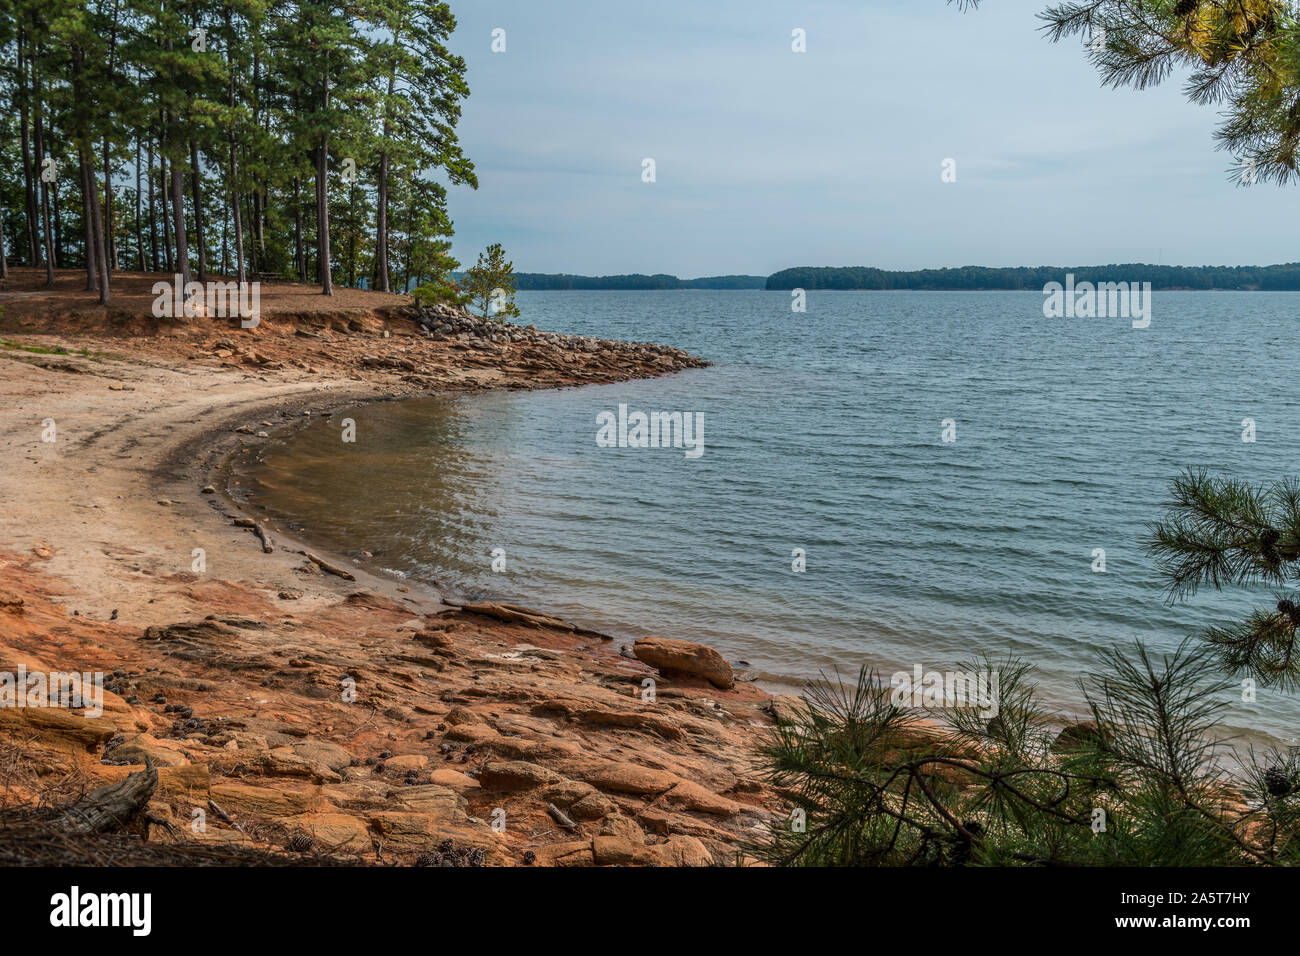 Severe drought conditions at Lake Lanier, Georgia eroding the shoreline exposing the rocks and boulders on a sunny day in fall Stock Photo